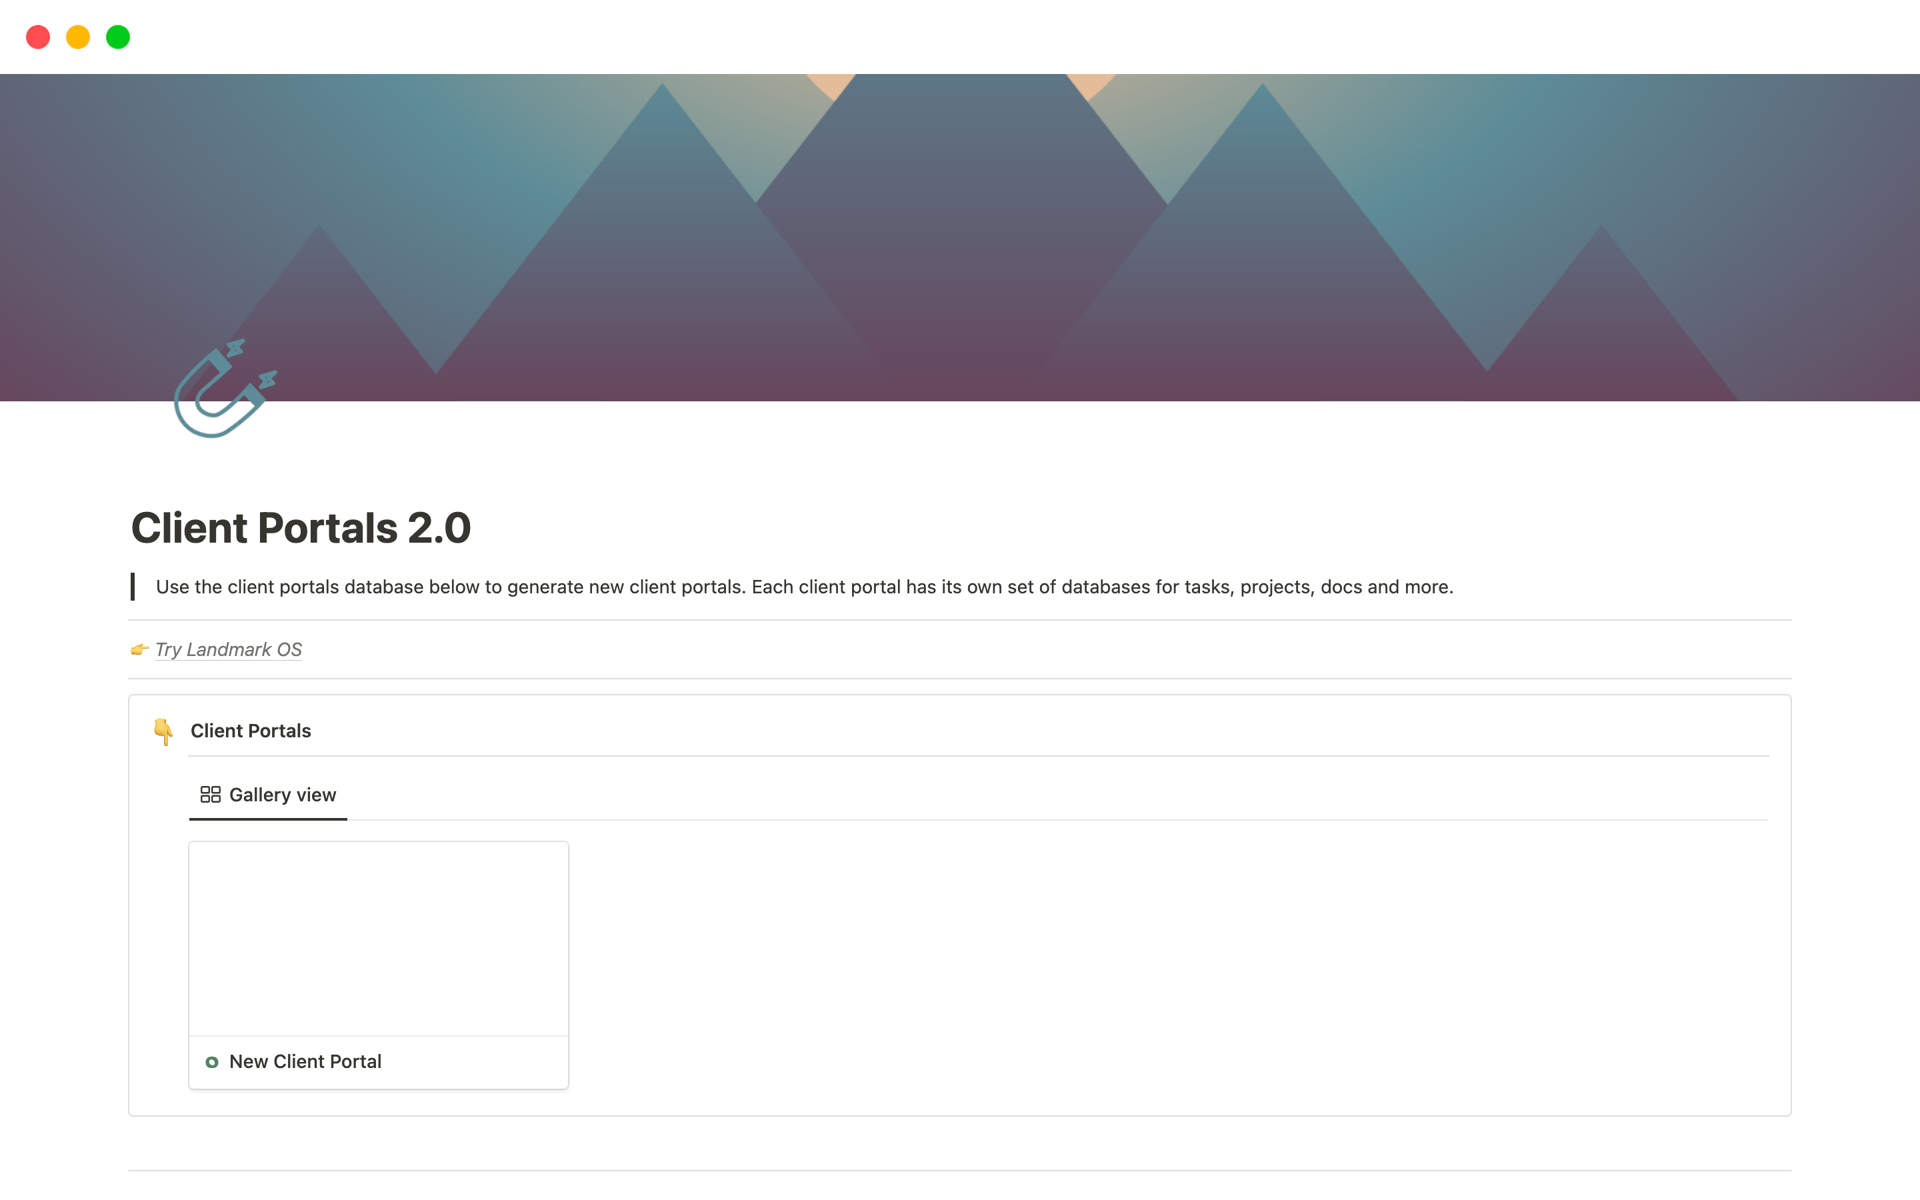 Upgrade your Client Portals in Notion with this 2.0 template.